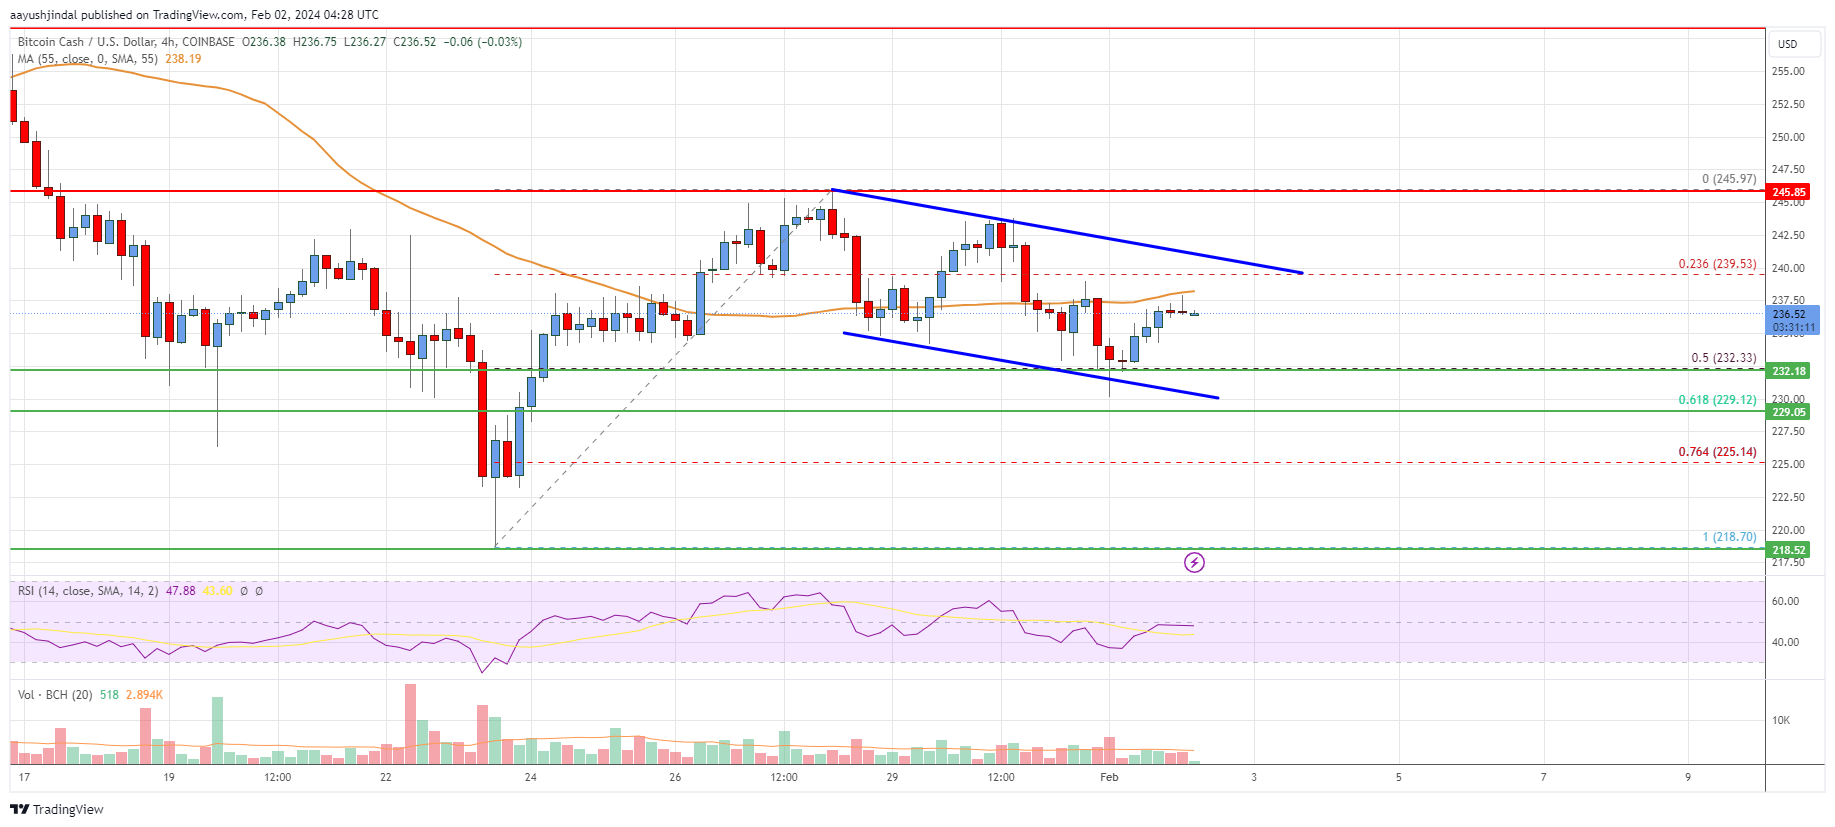 Bitcoin Cash Analysis: Dips Could Be Supported Near $230